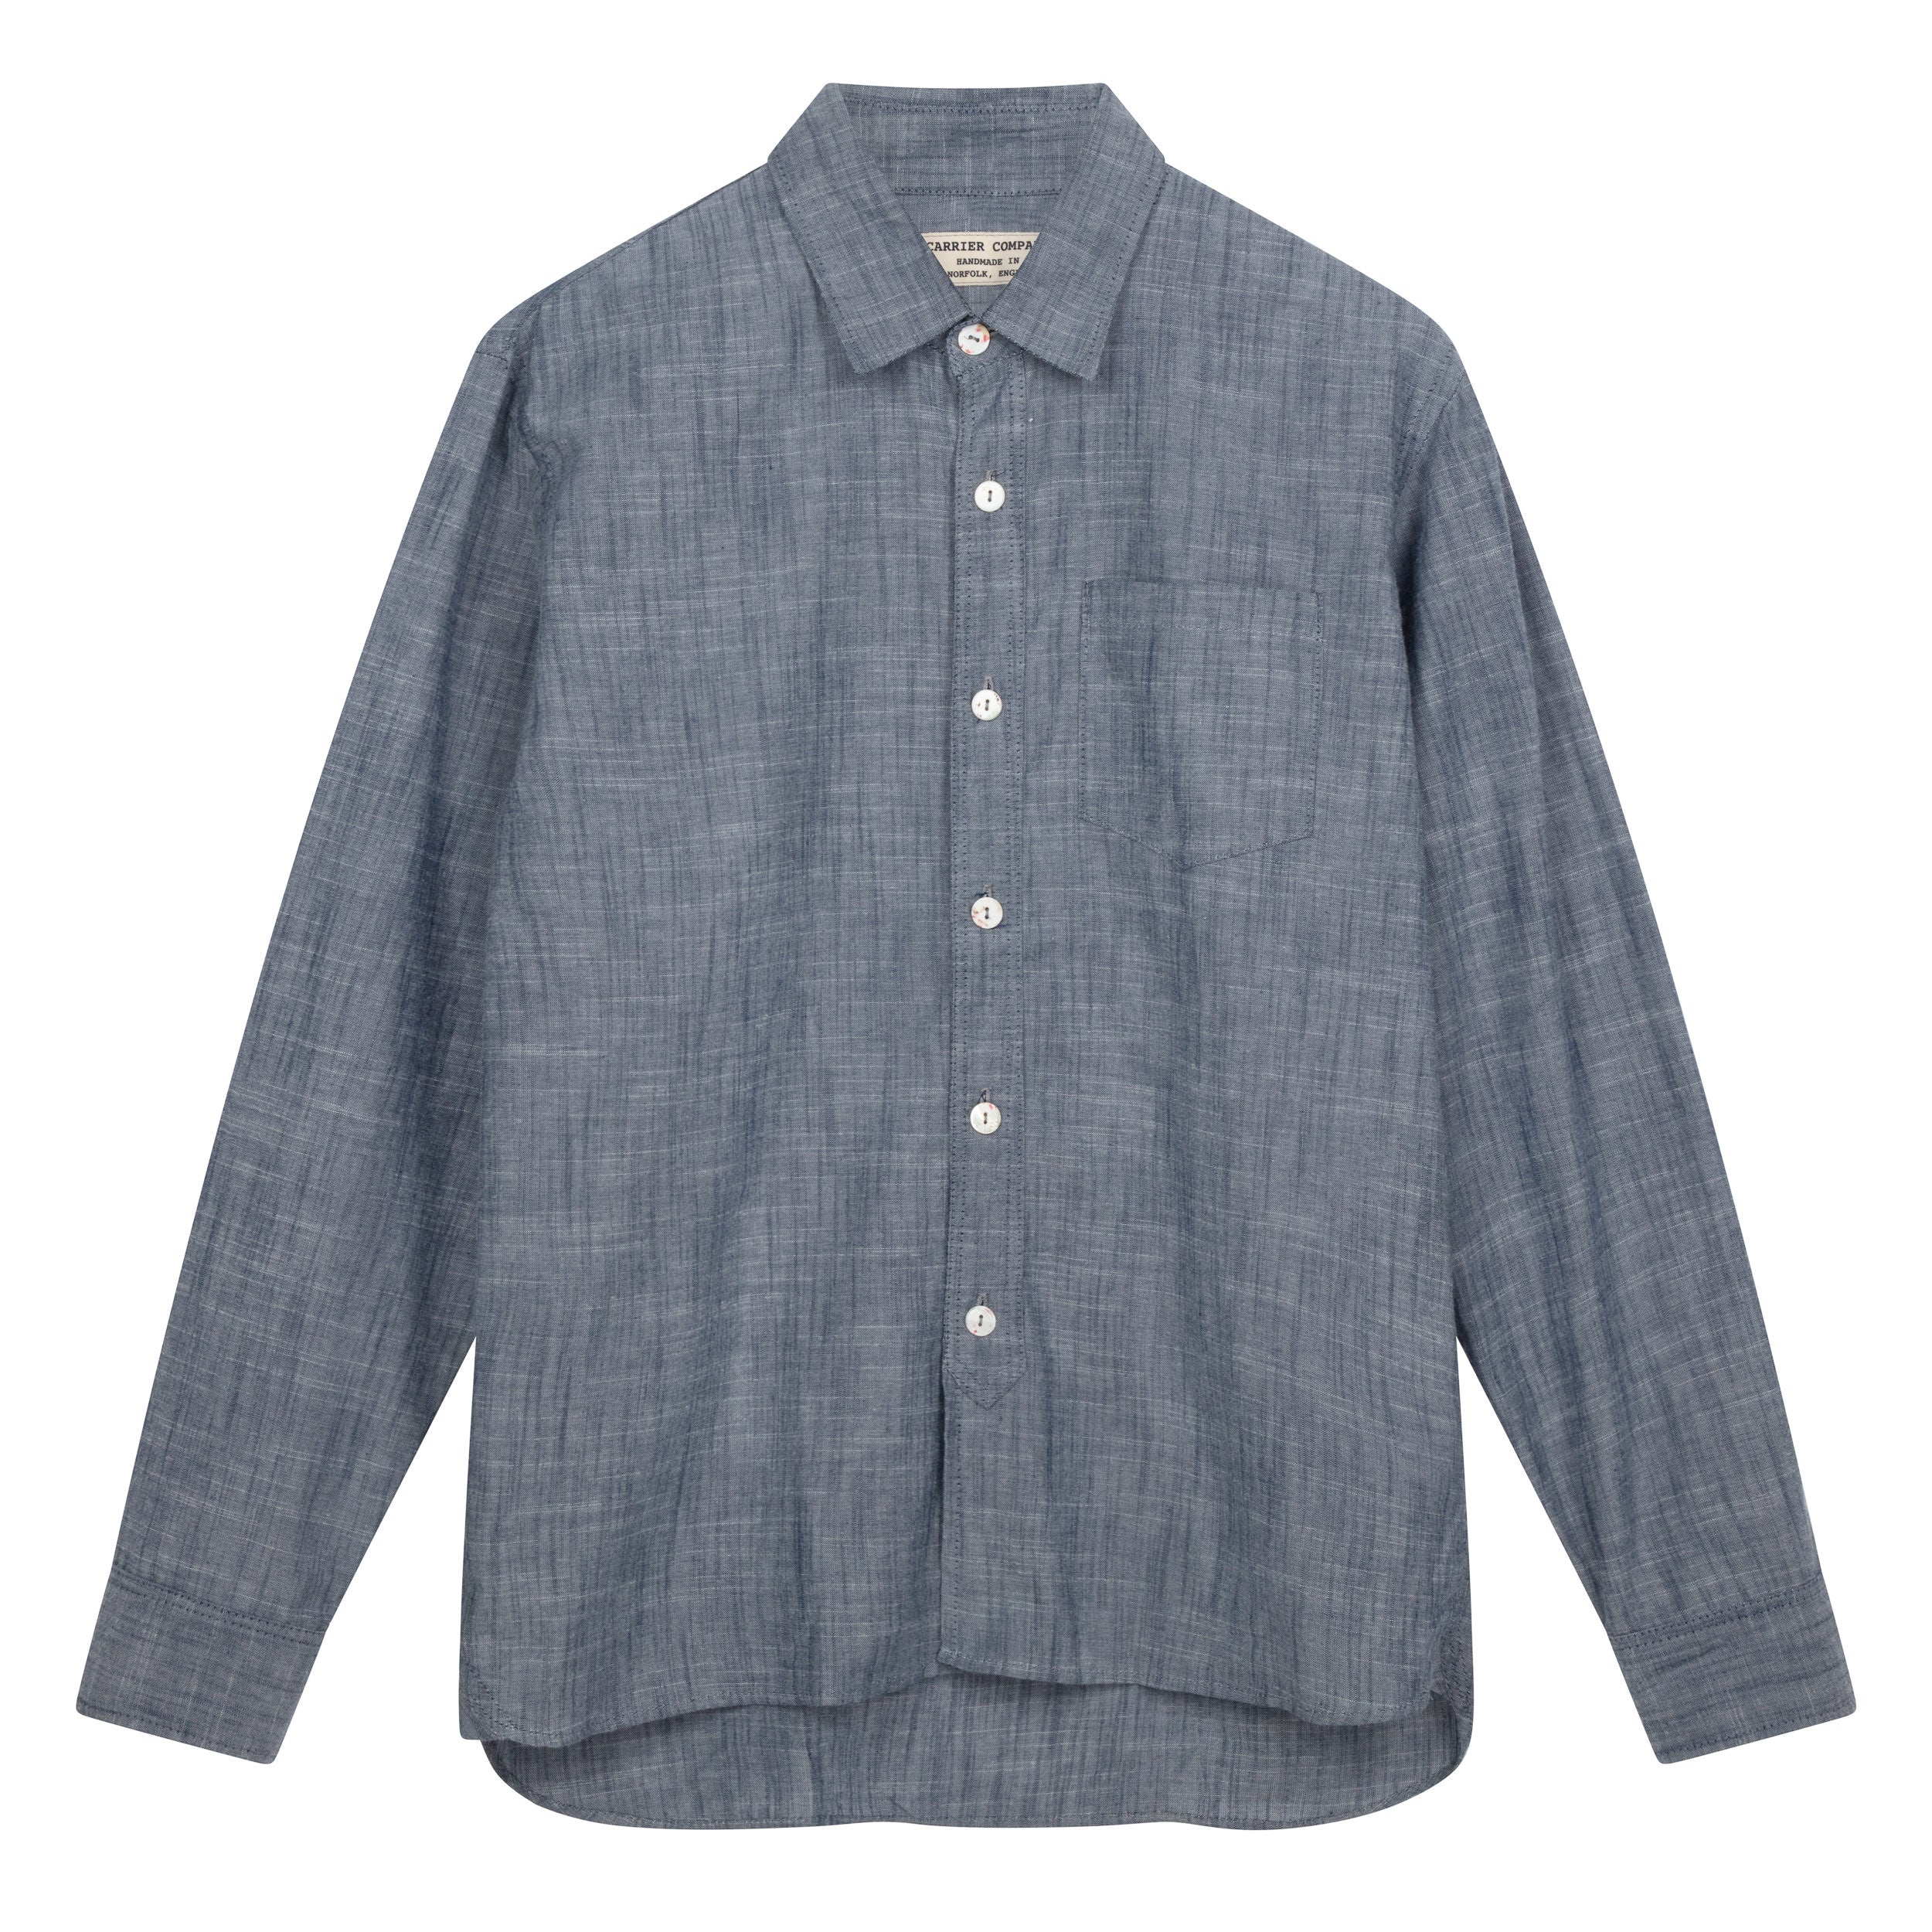 Carrier Company Chambray Shirt